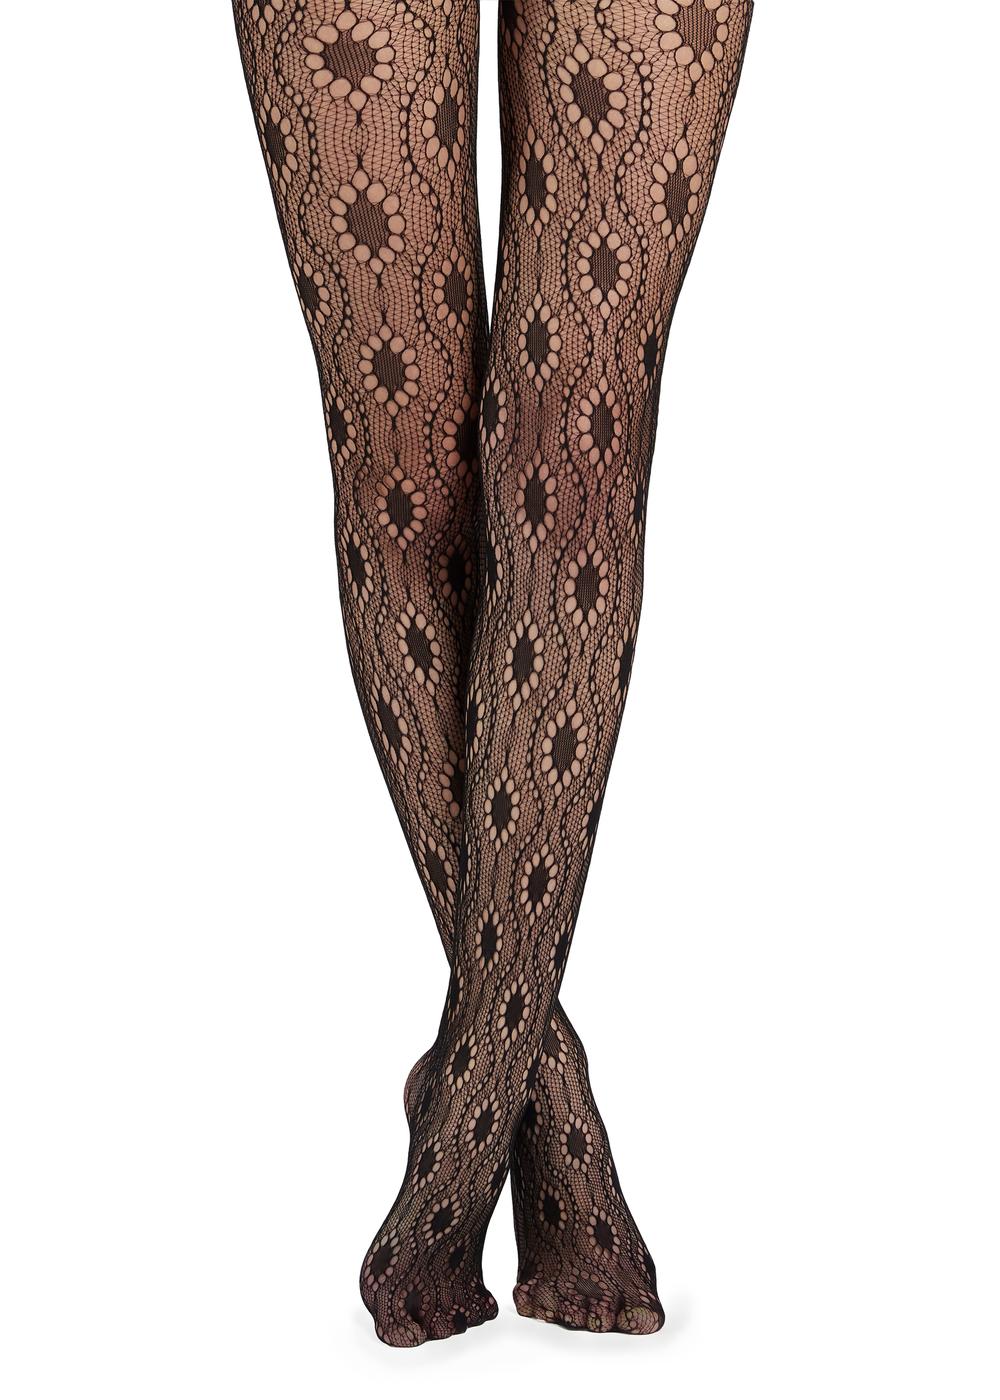 Floral fishnet tights - Calzedonia